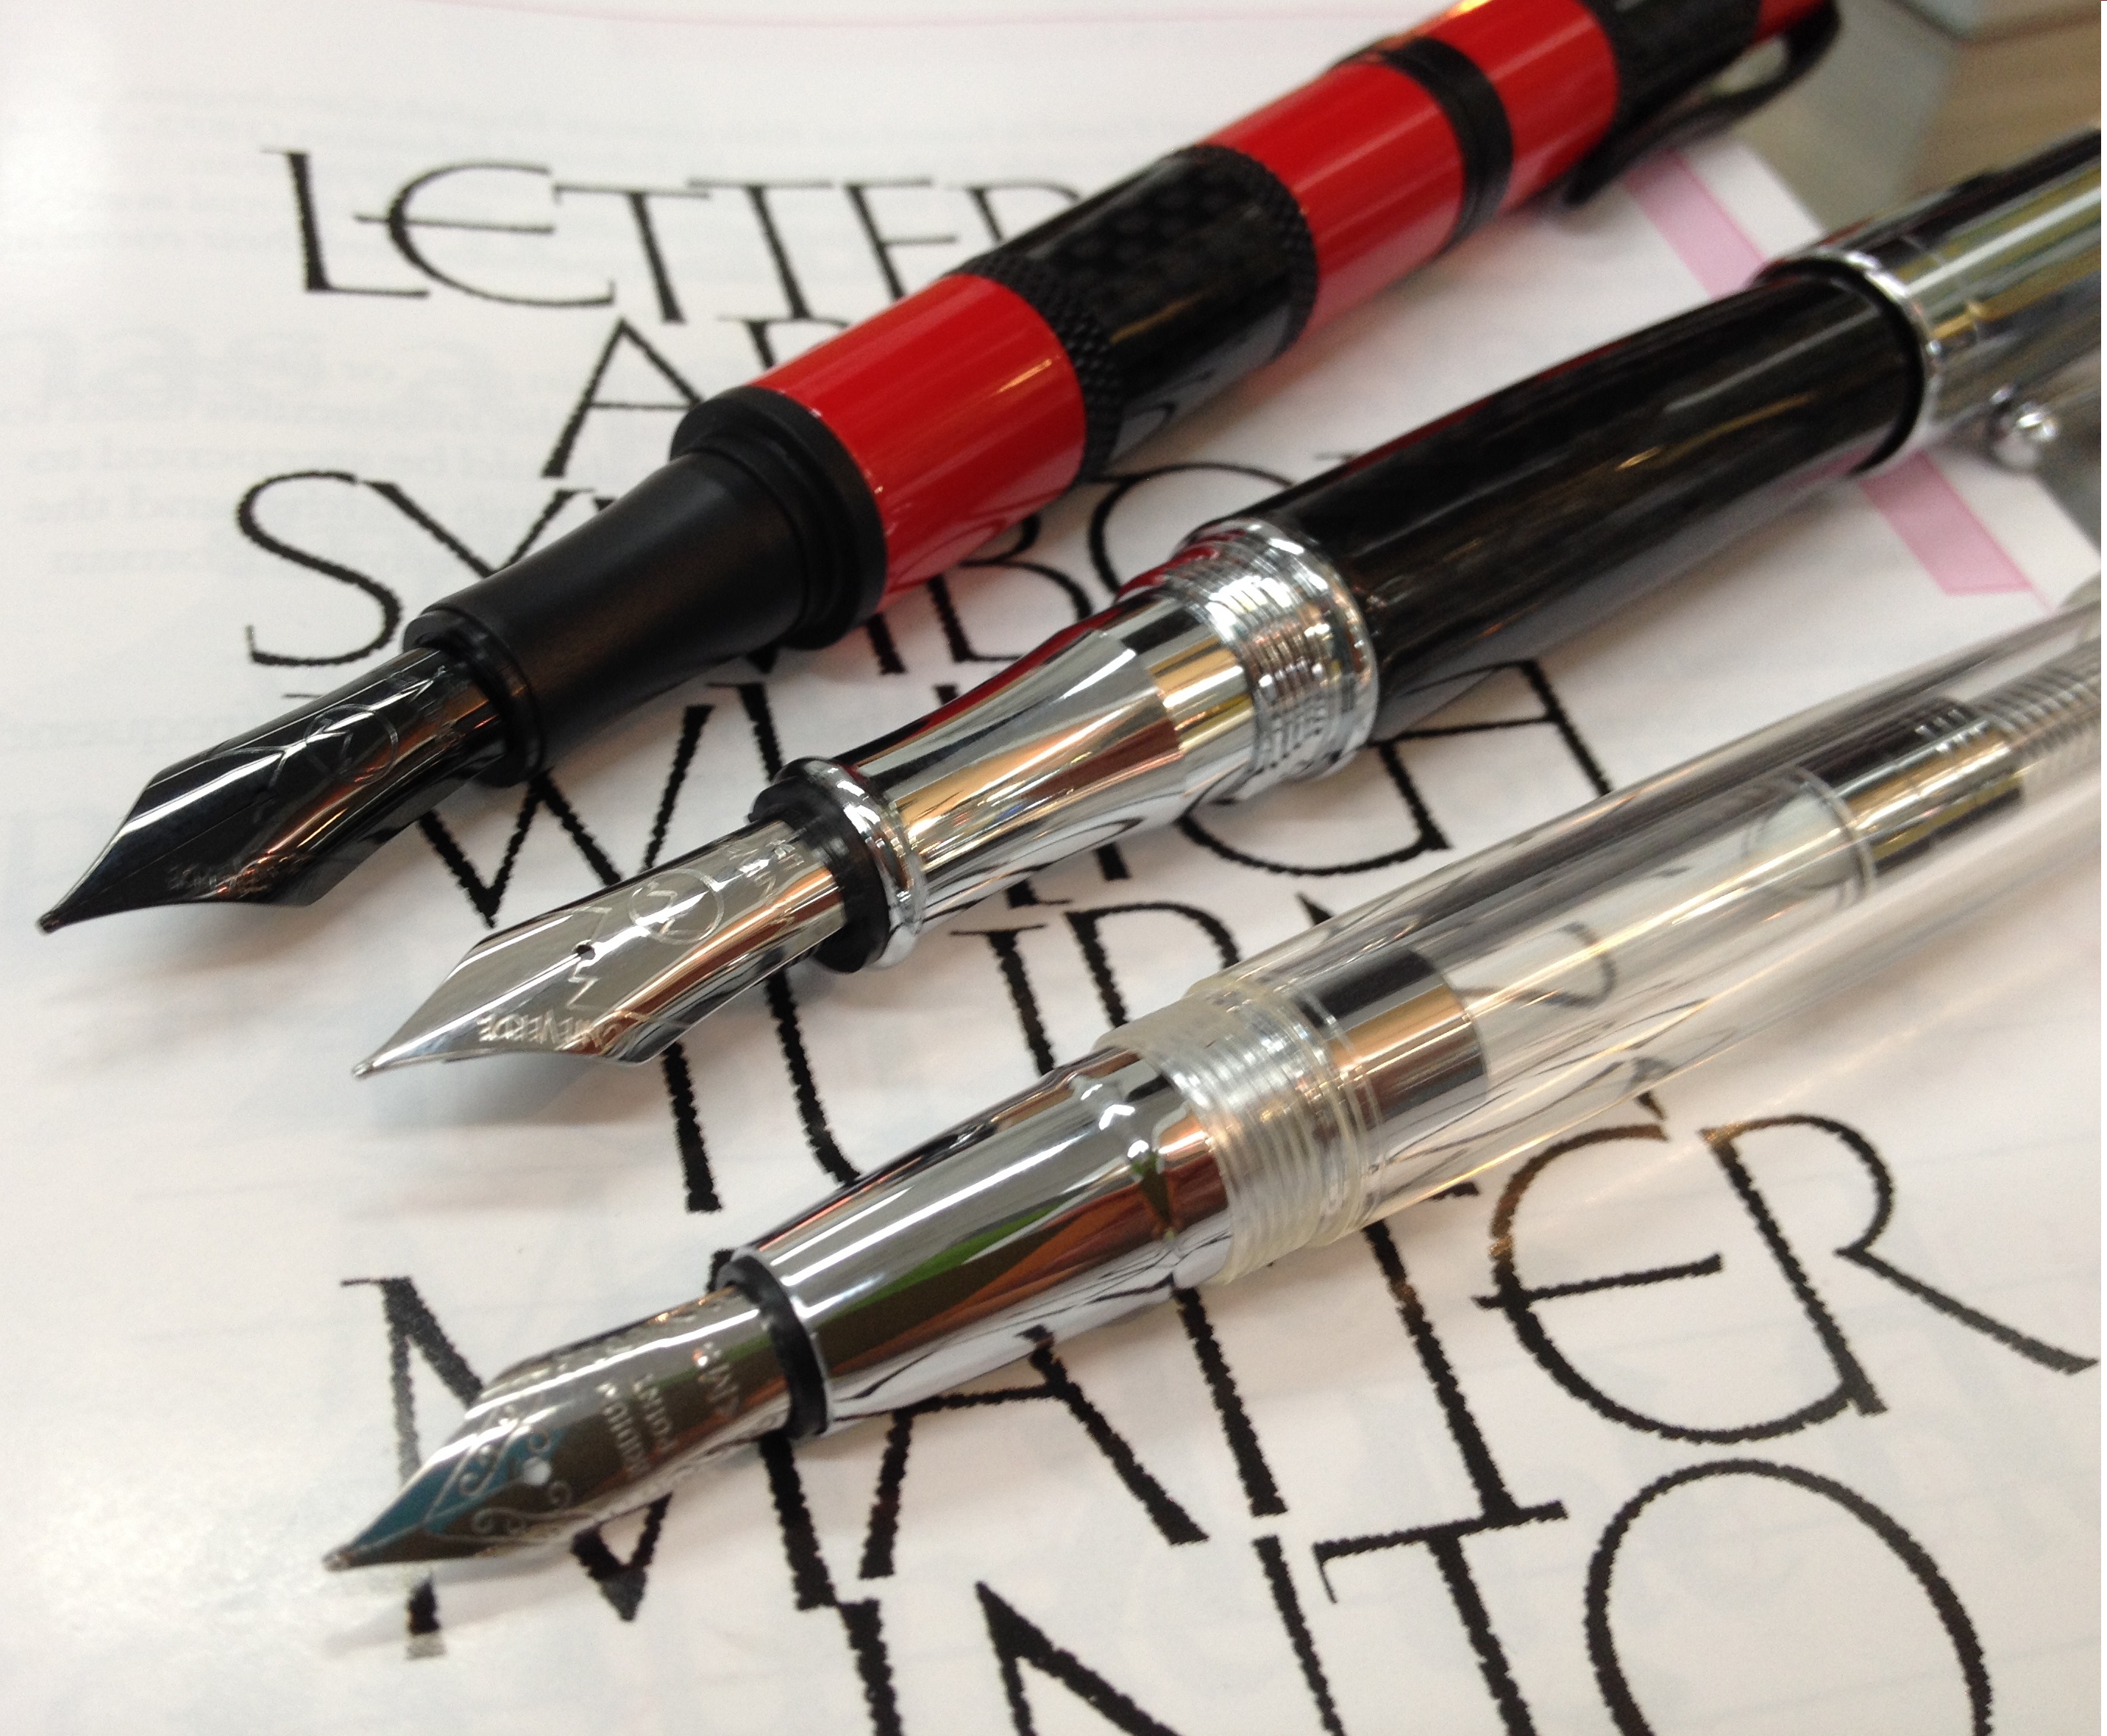 Pens for Writing and Drawing